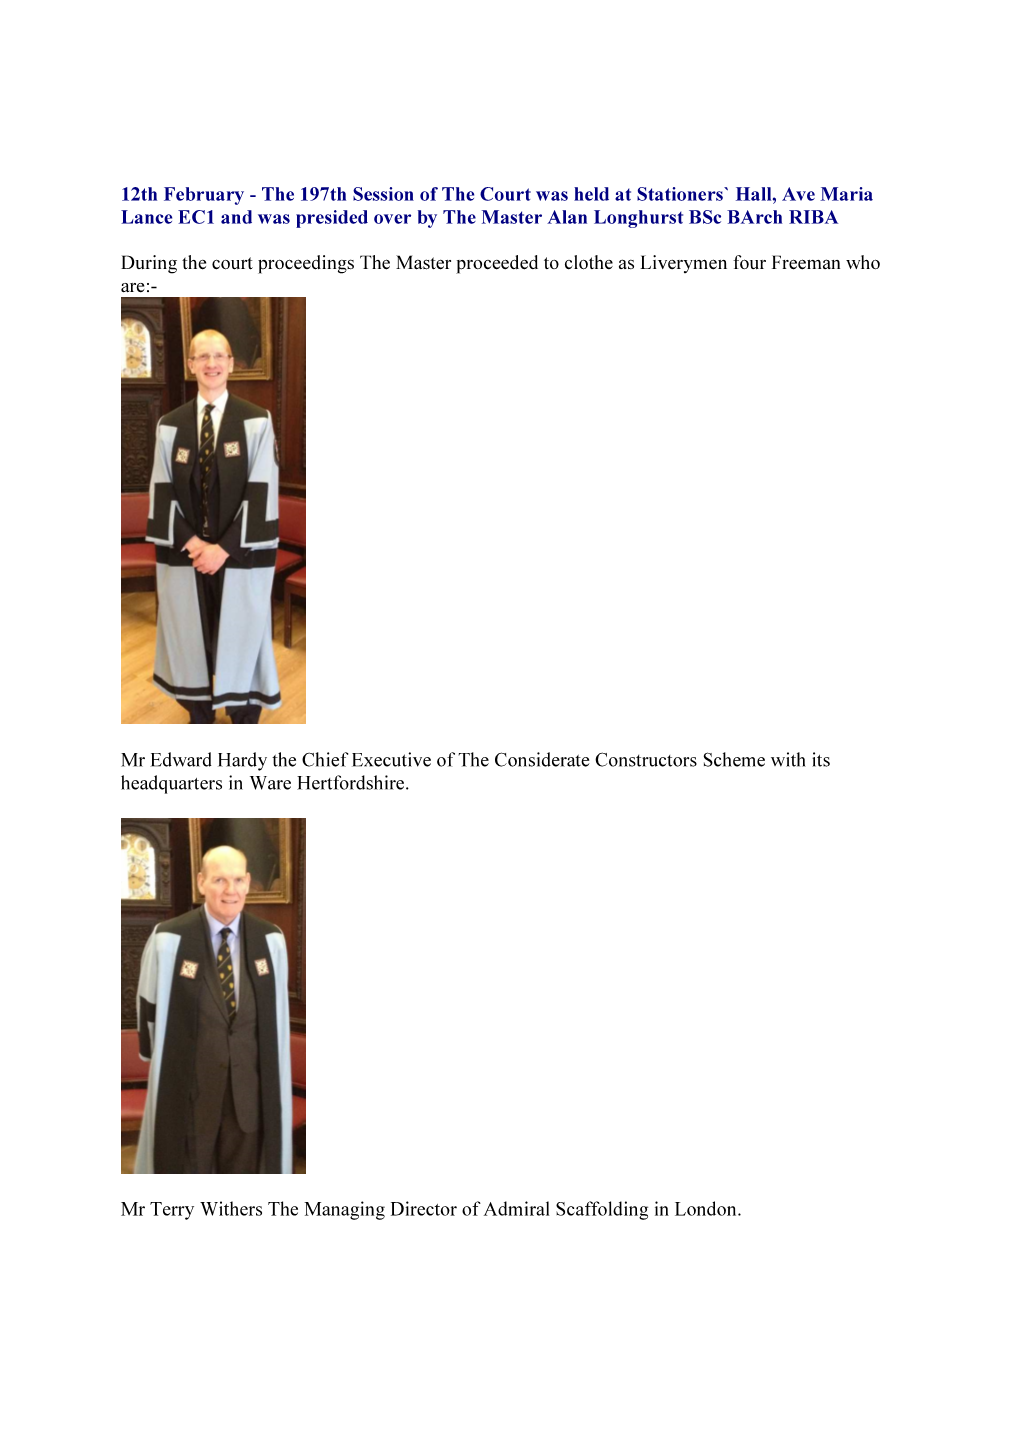 The 197Th Session of the Court Was Held at Stationers` Hall, Ave Maria Lance EC1 and Was Presided Over by the Master Alan Longhurst Bsc Barch RIBA